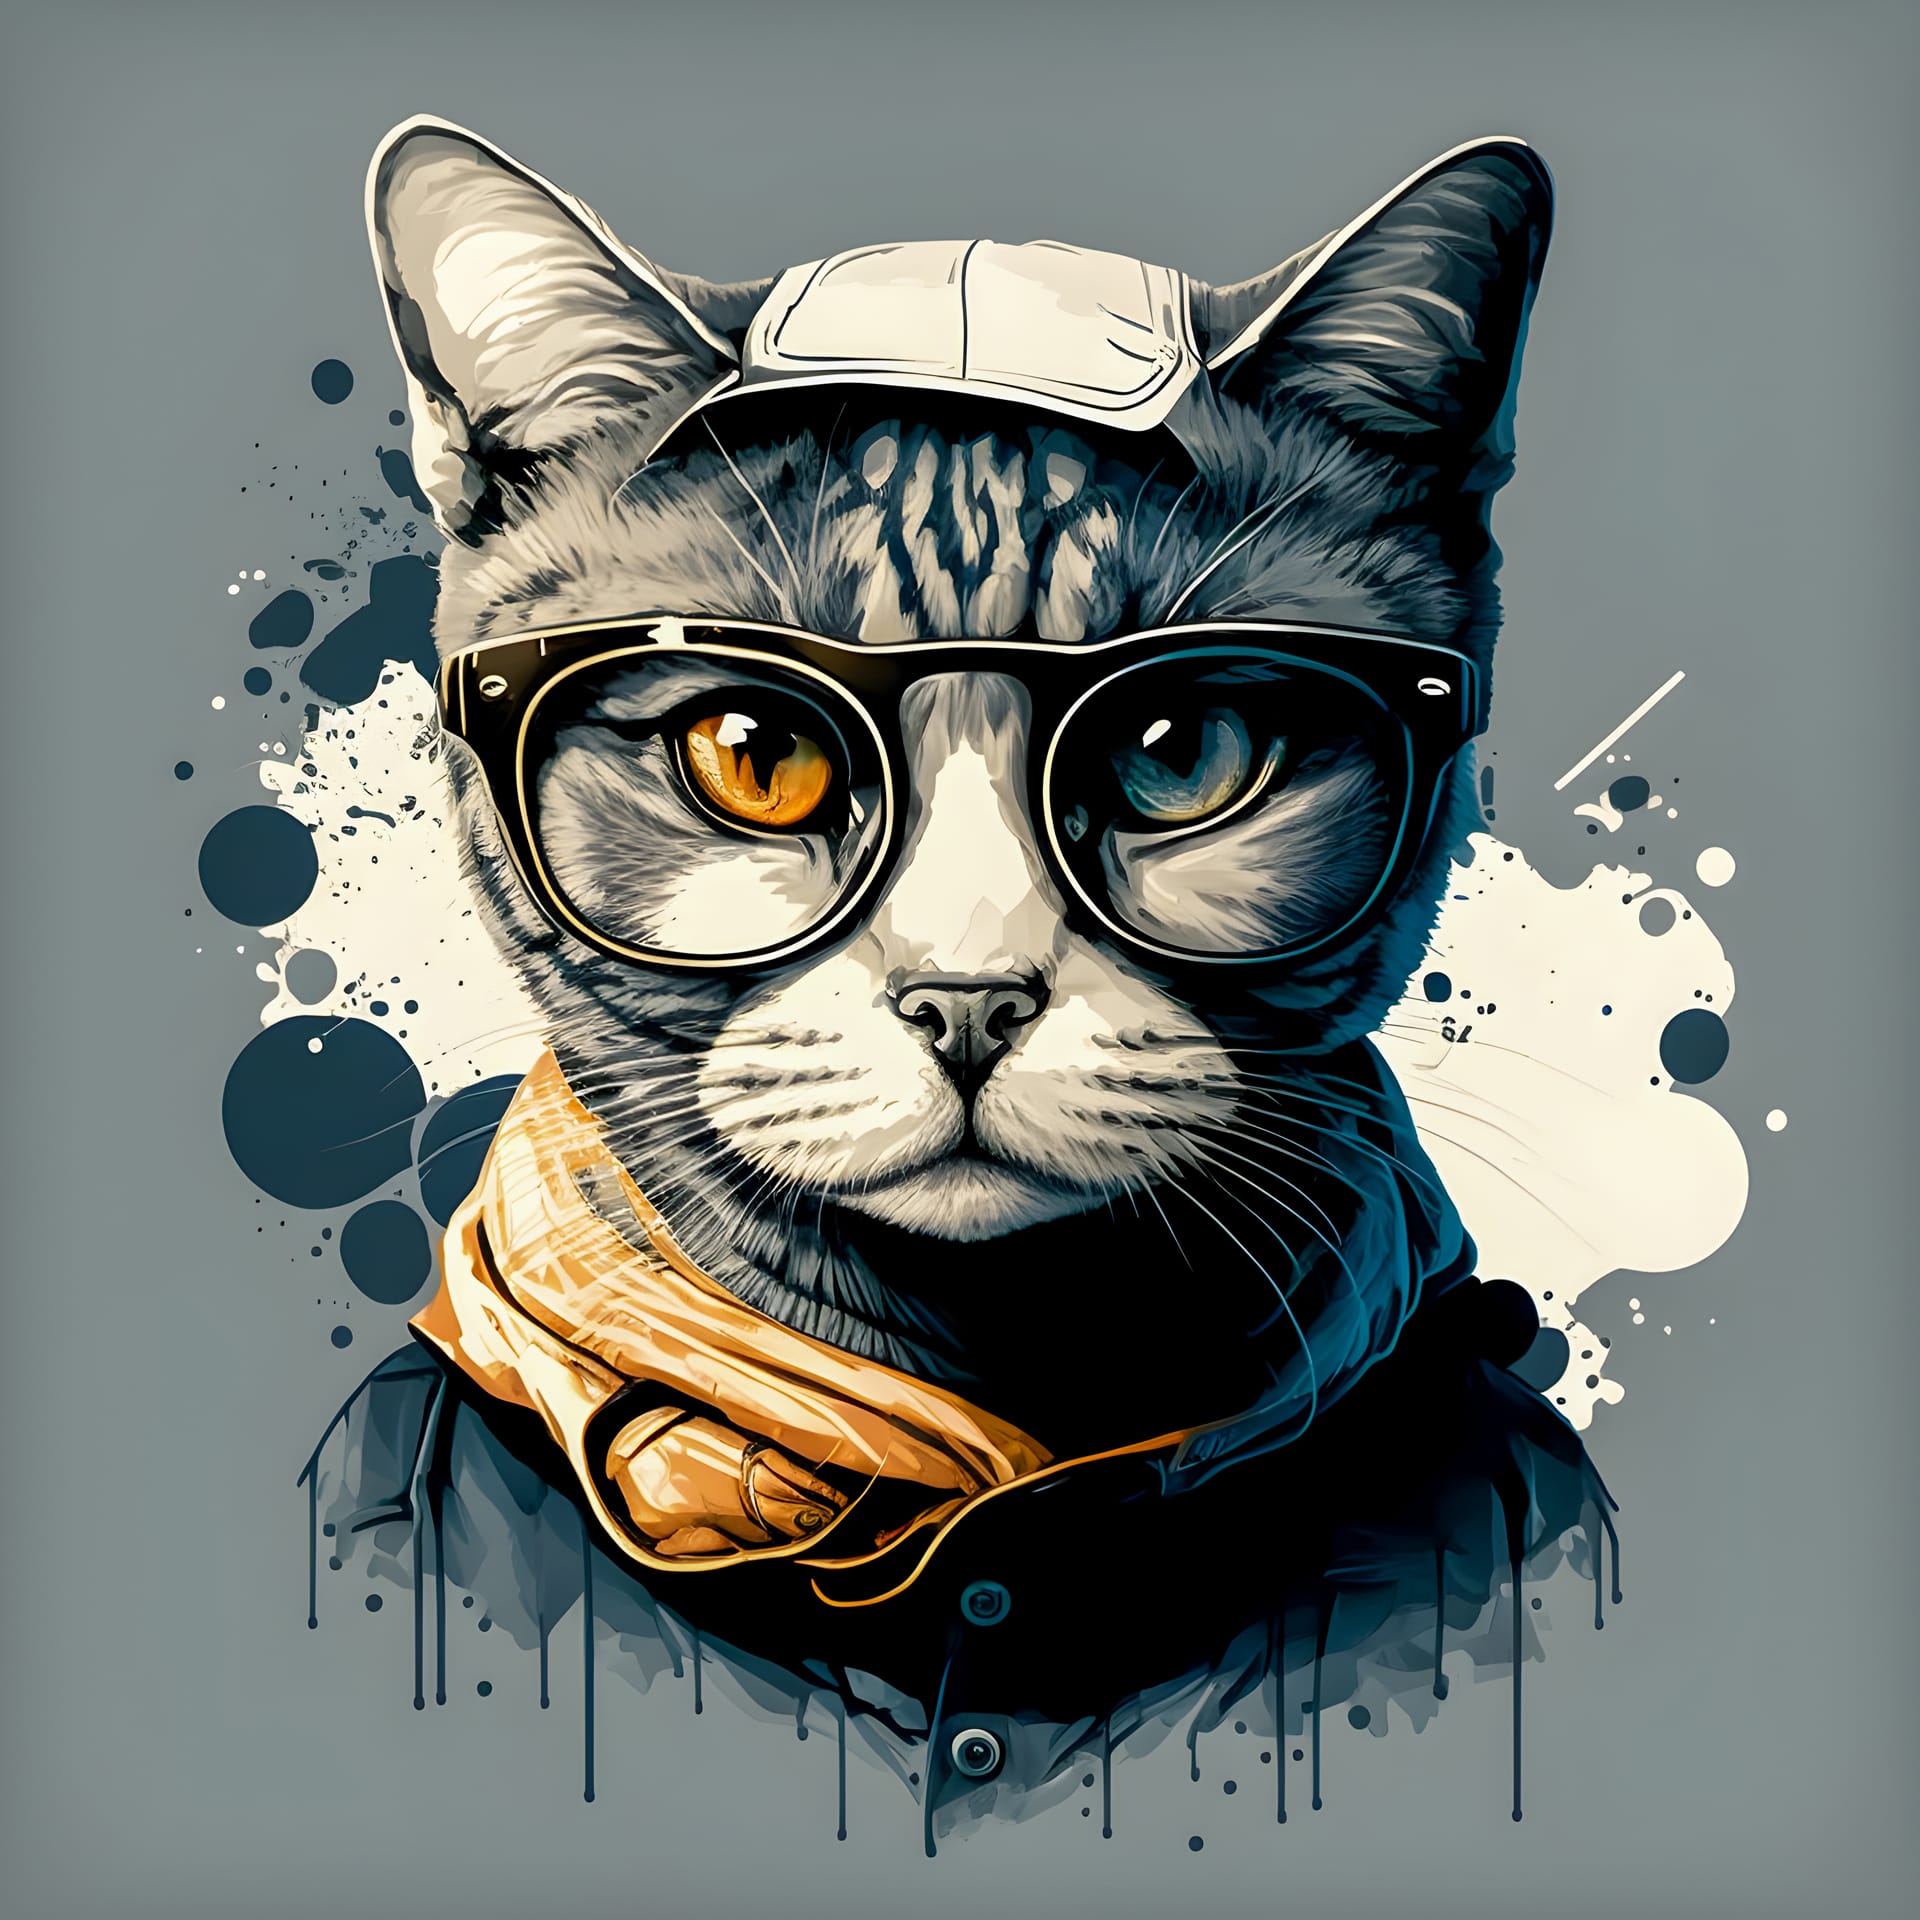 Hipster cute cat profile picture illustration hand drawn image